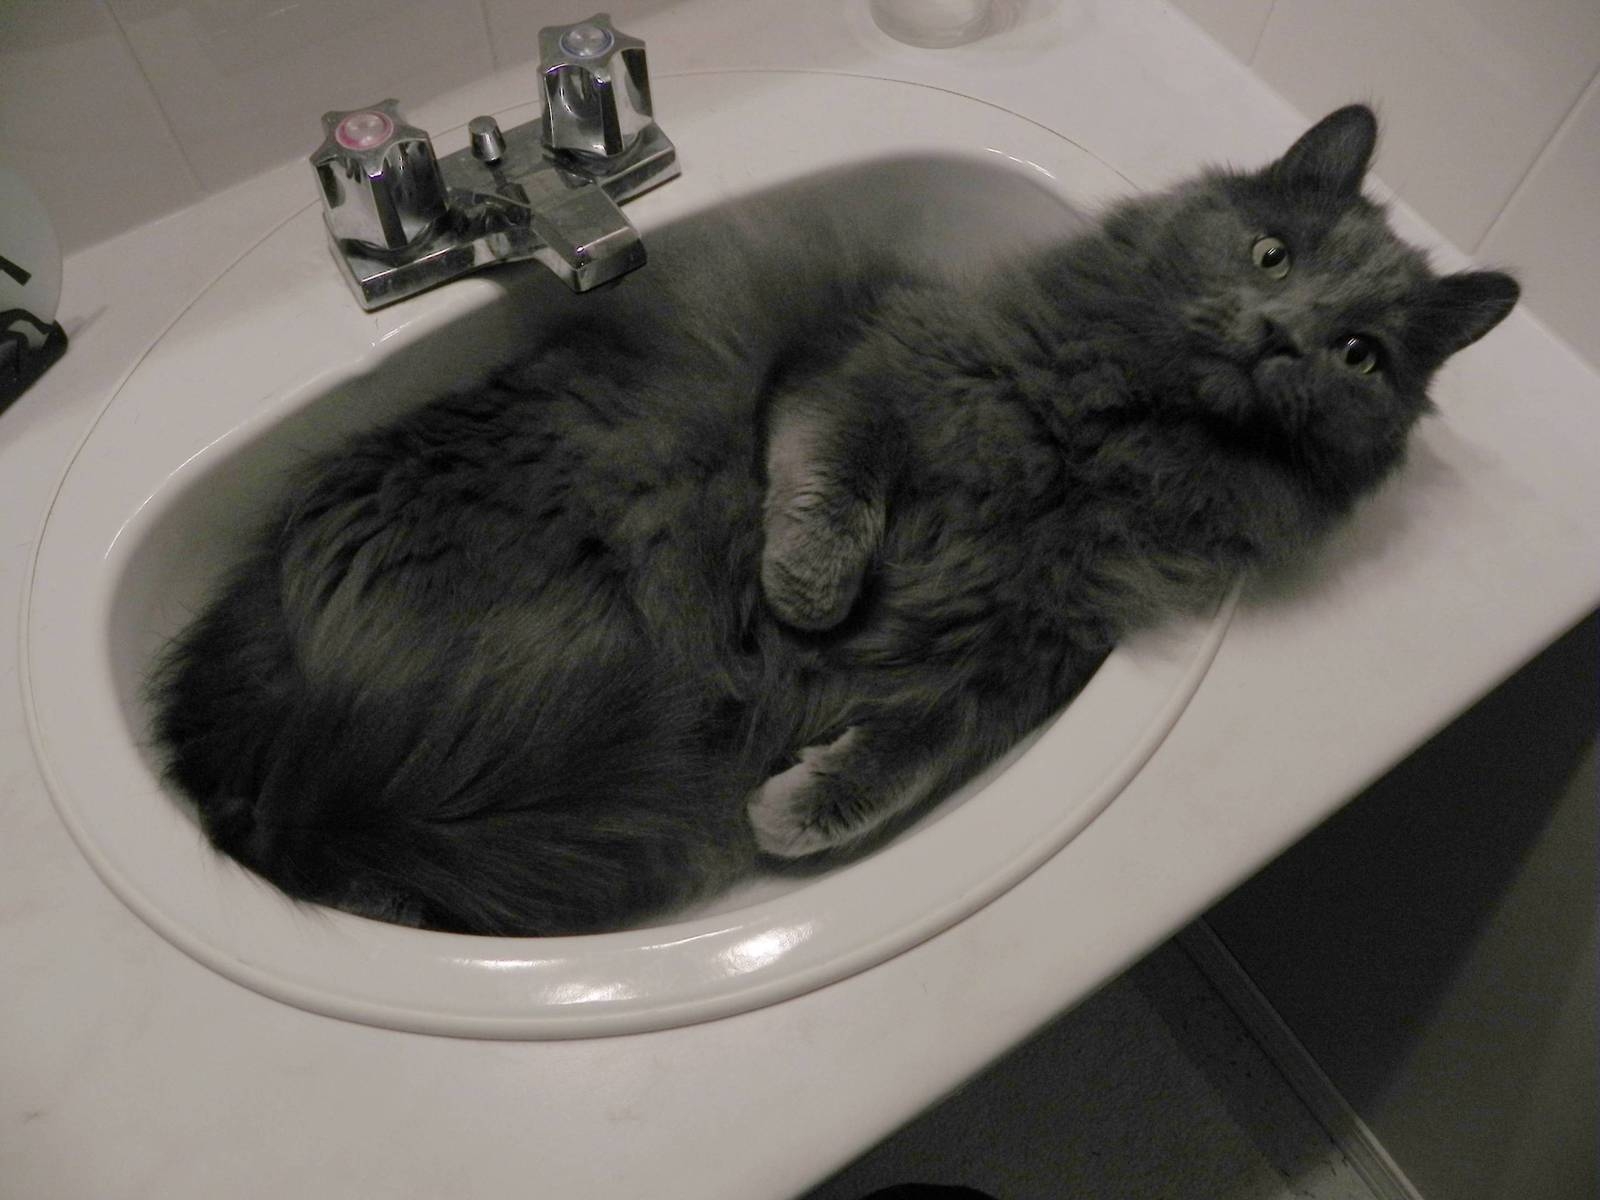 Nebelung Cat in Sink for 1600 x 1200 resolution